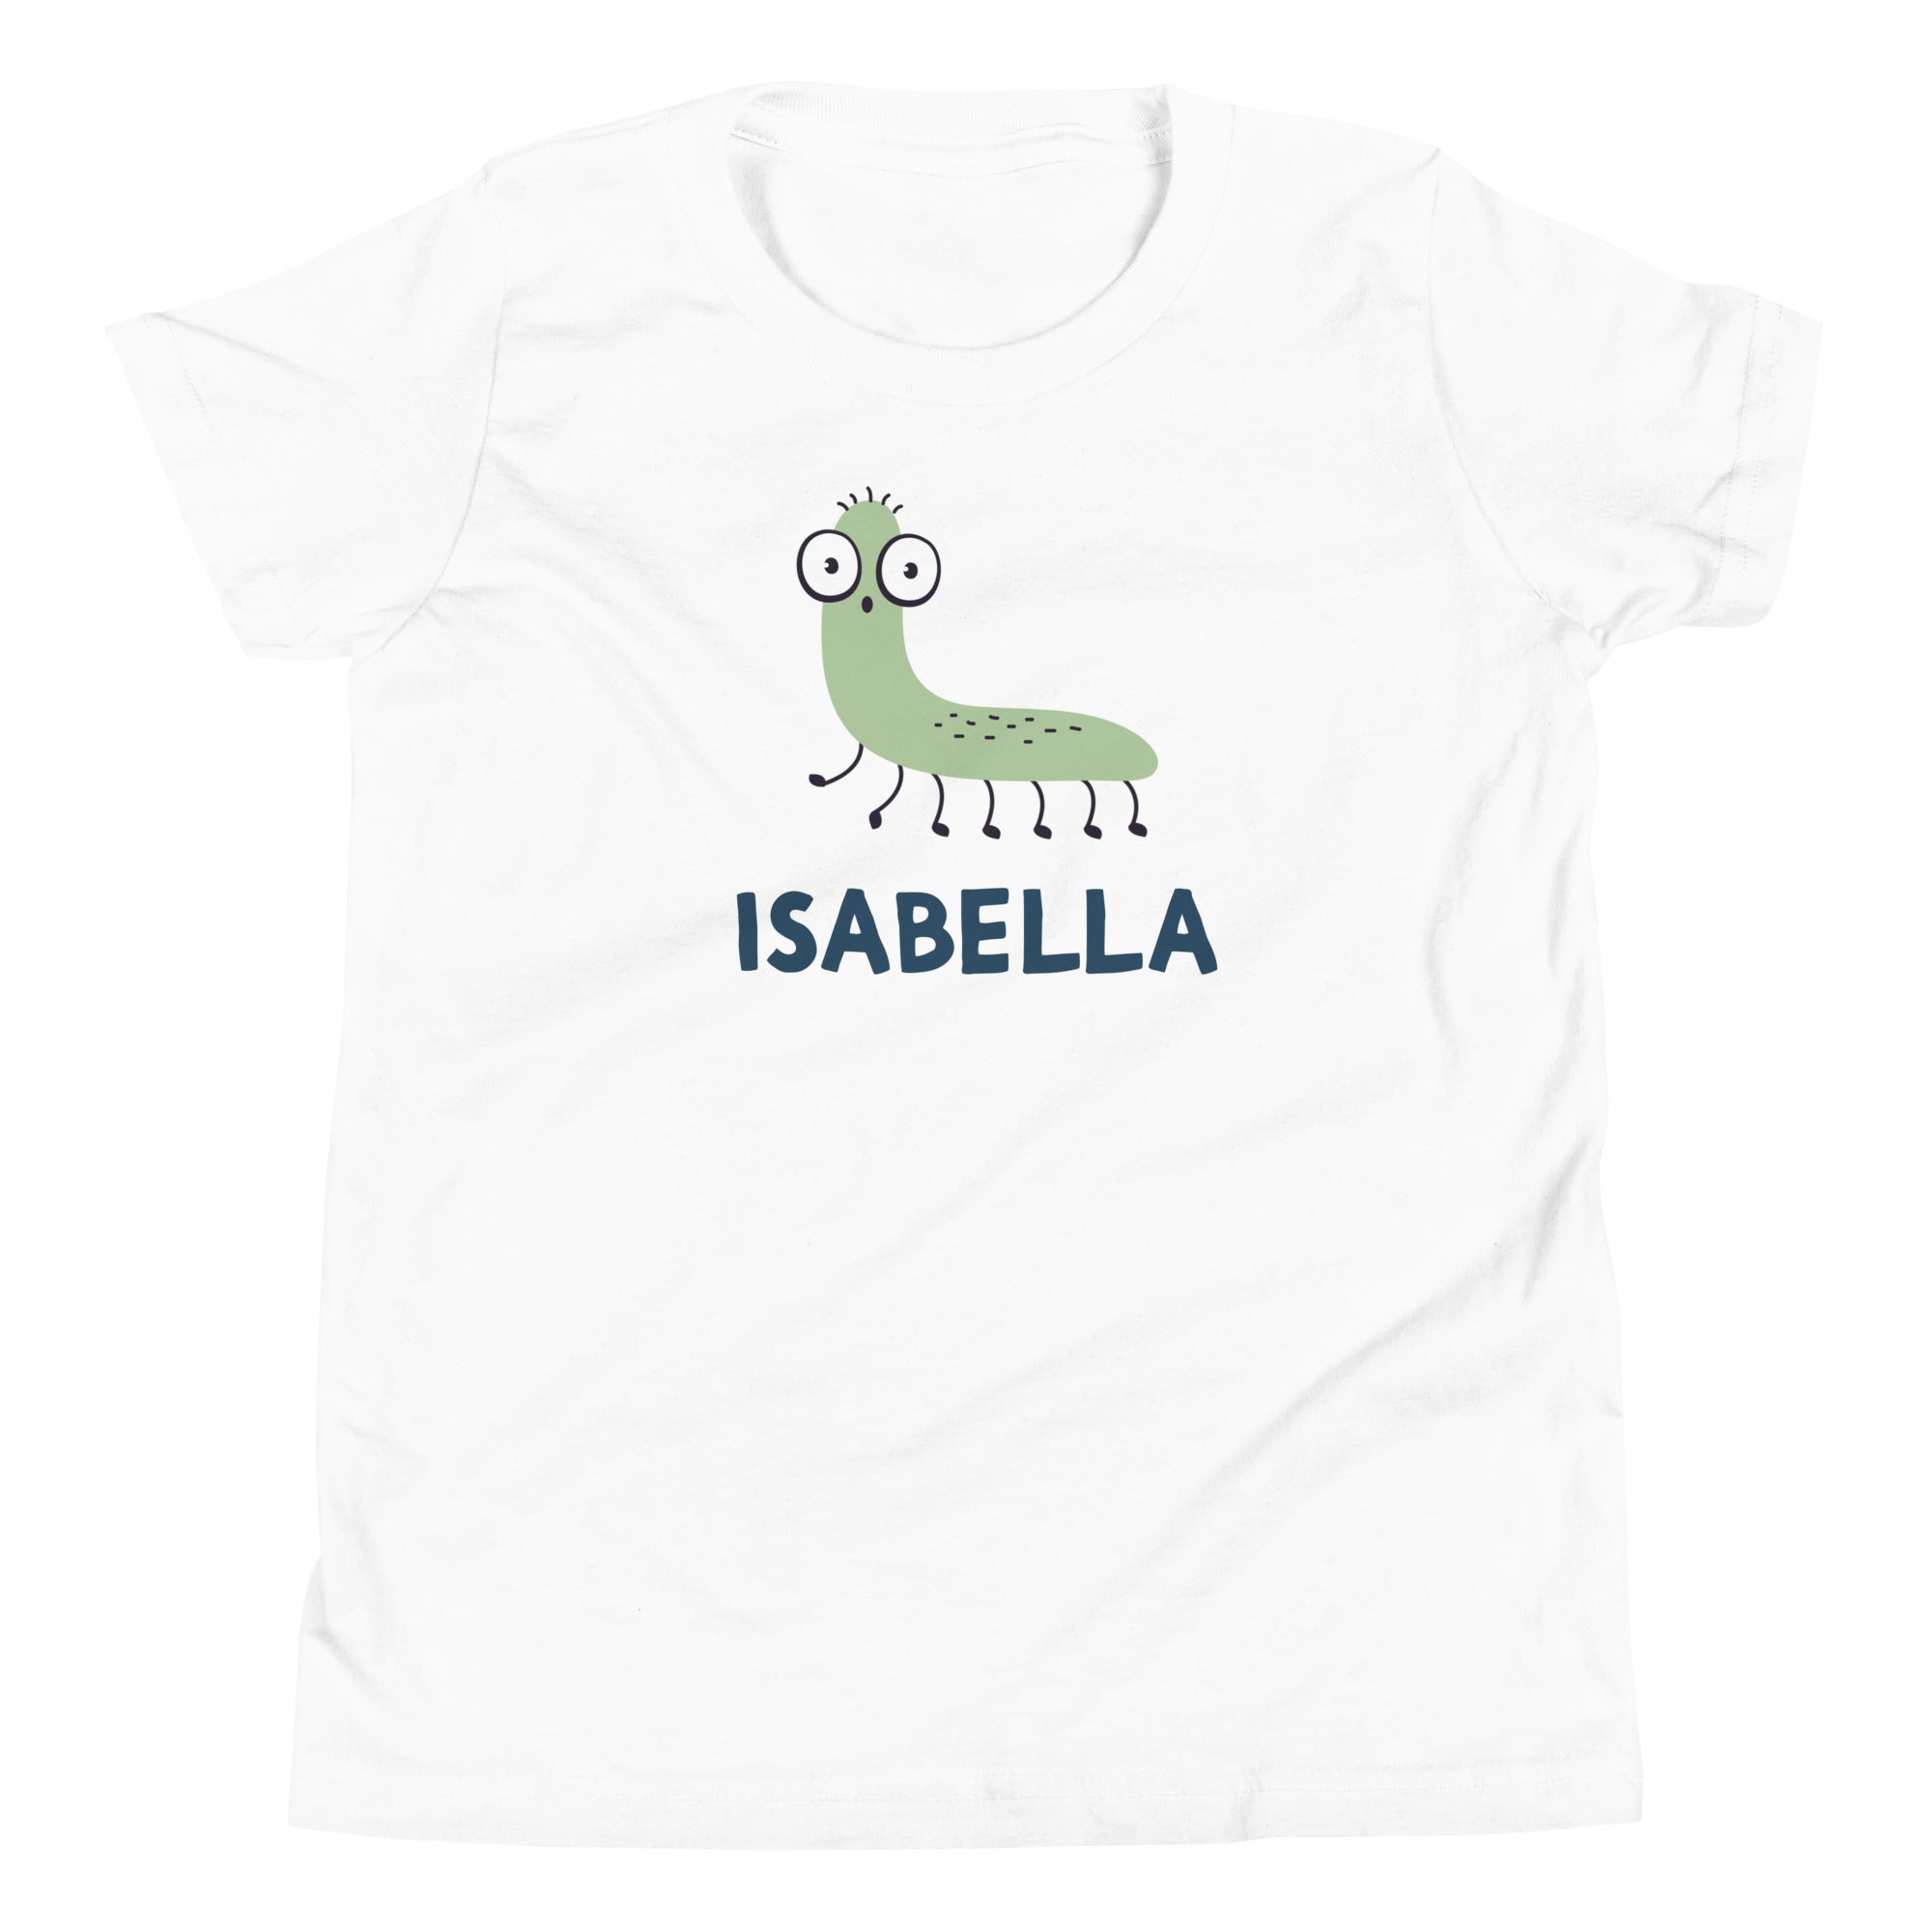 Personalized kid's tee from the cute crawlies collection